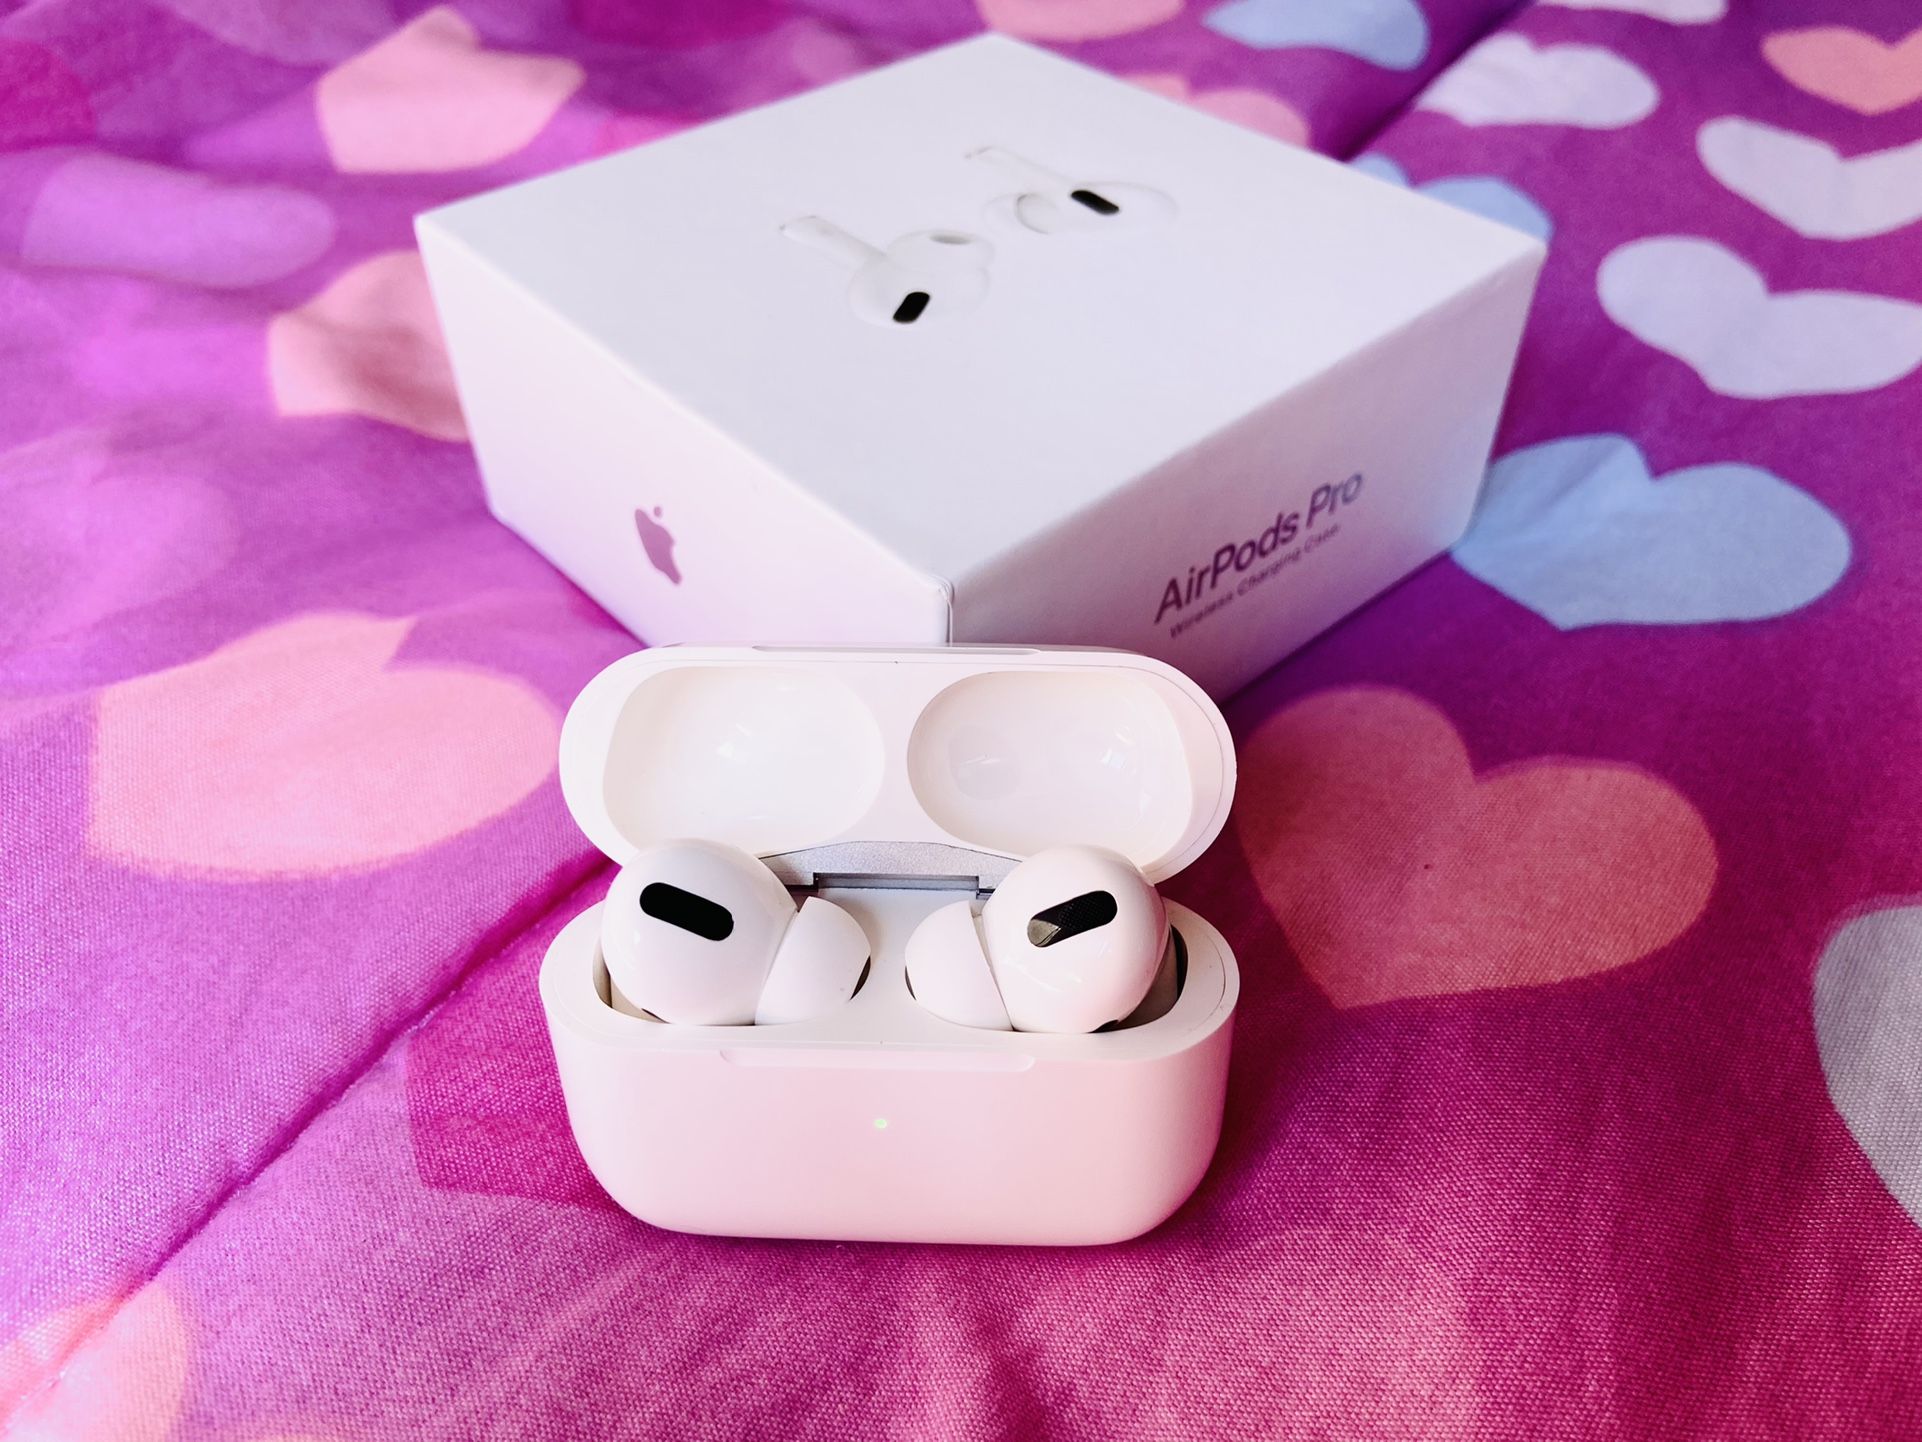 🛍NEW🛍 Airpods Pro Airpods 3d generation Ear Pods earpods Ear Bugs Wireless Bluetooth Headsets